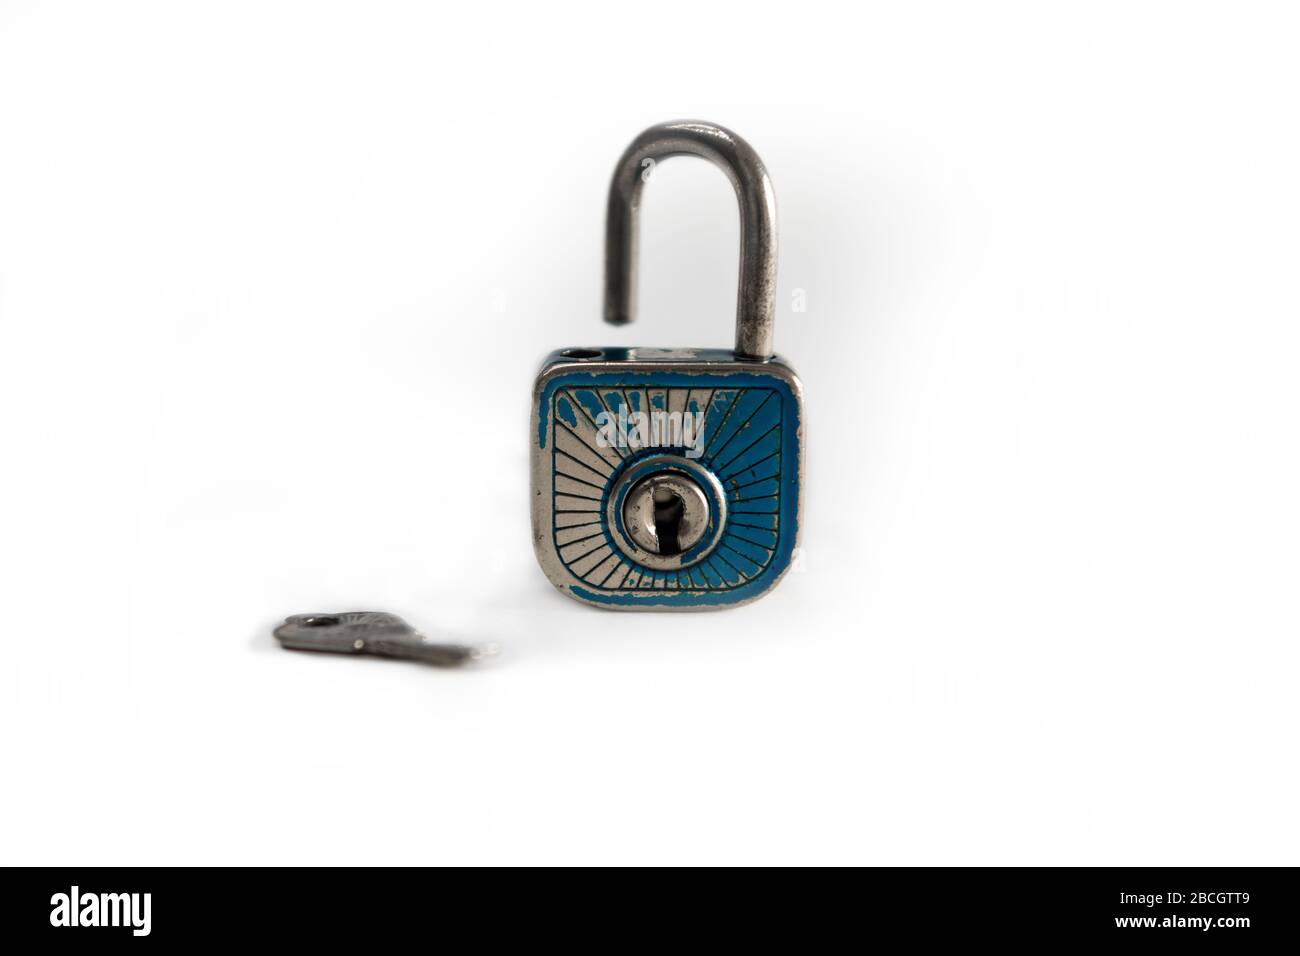 An open old padlock with a key, white background. Stock Photo